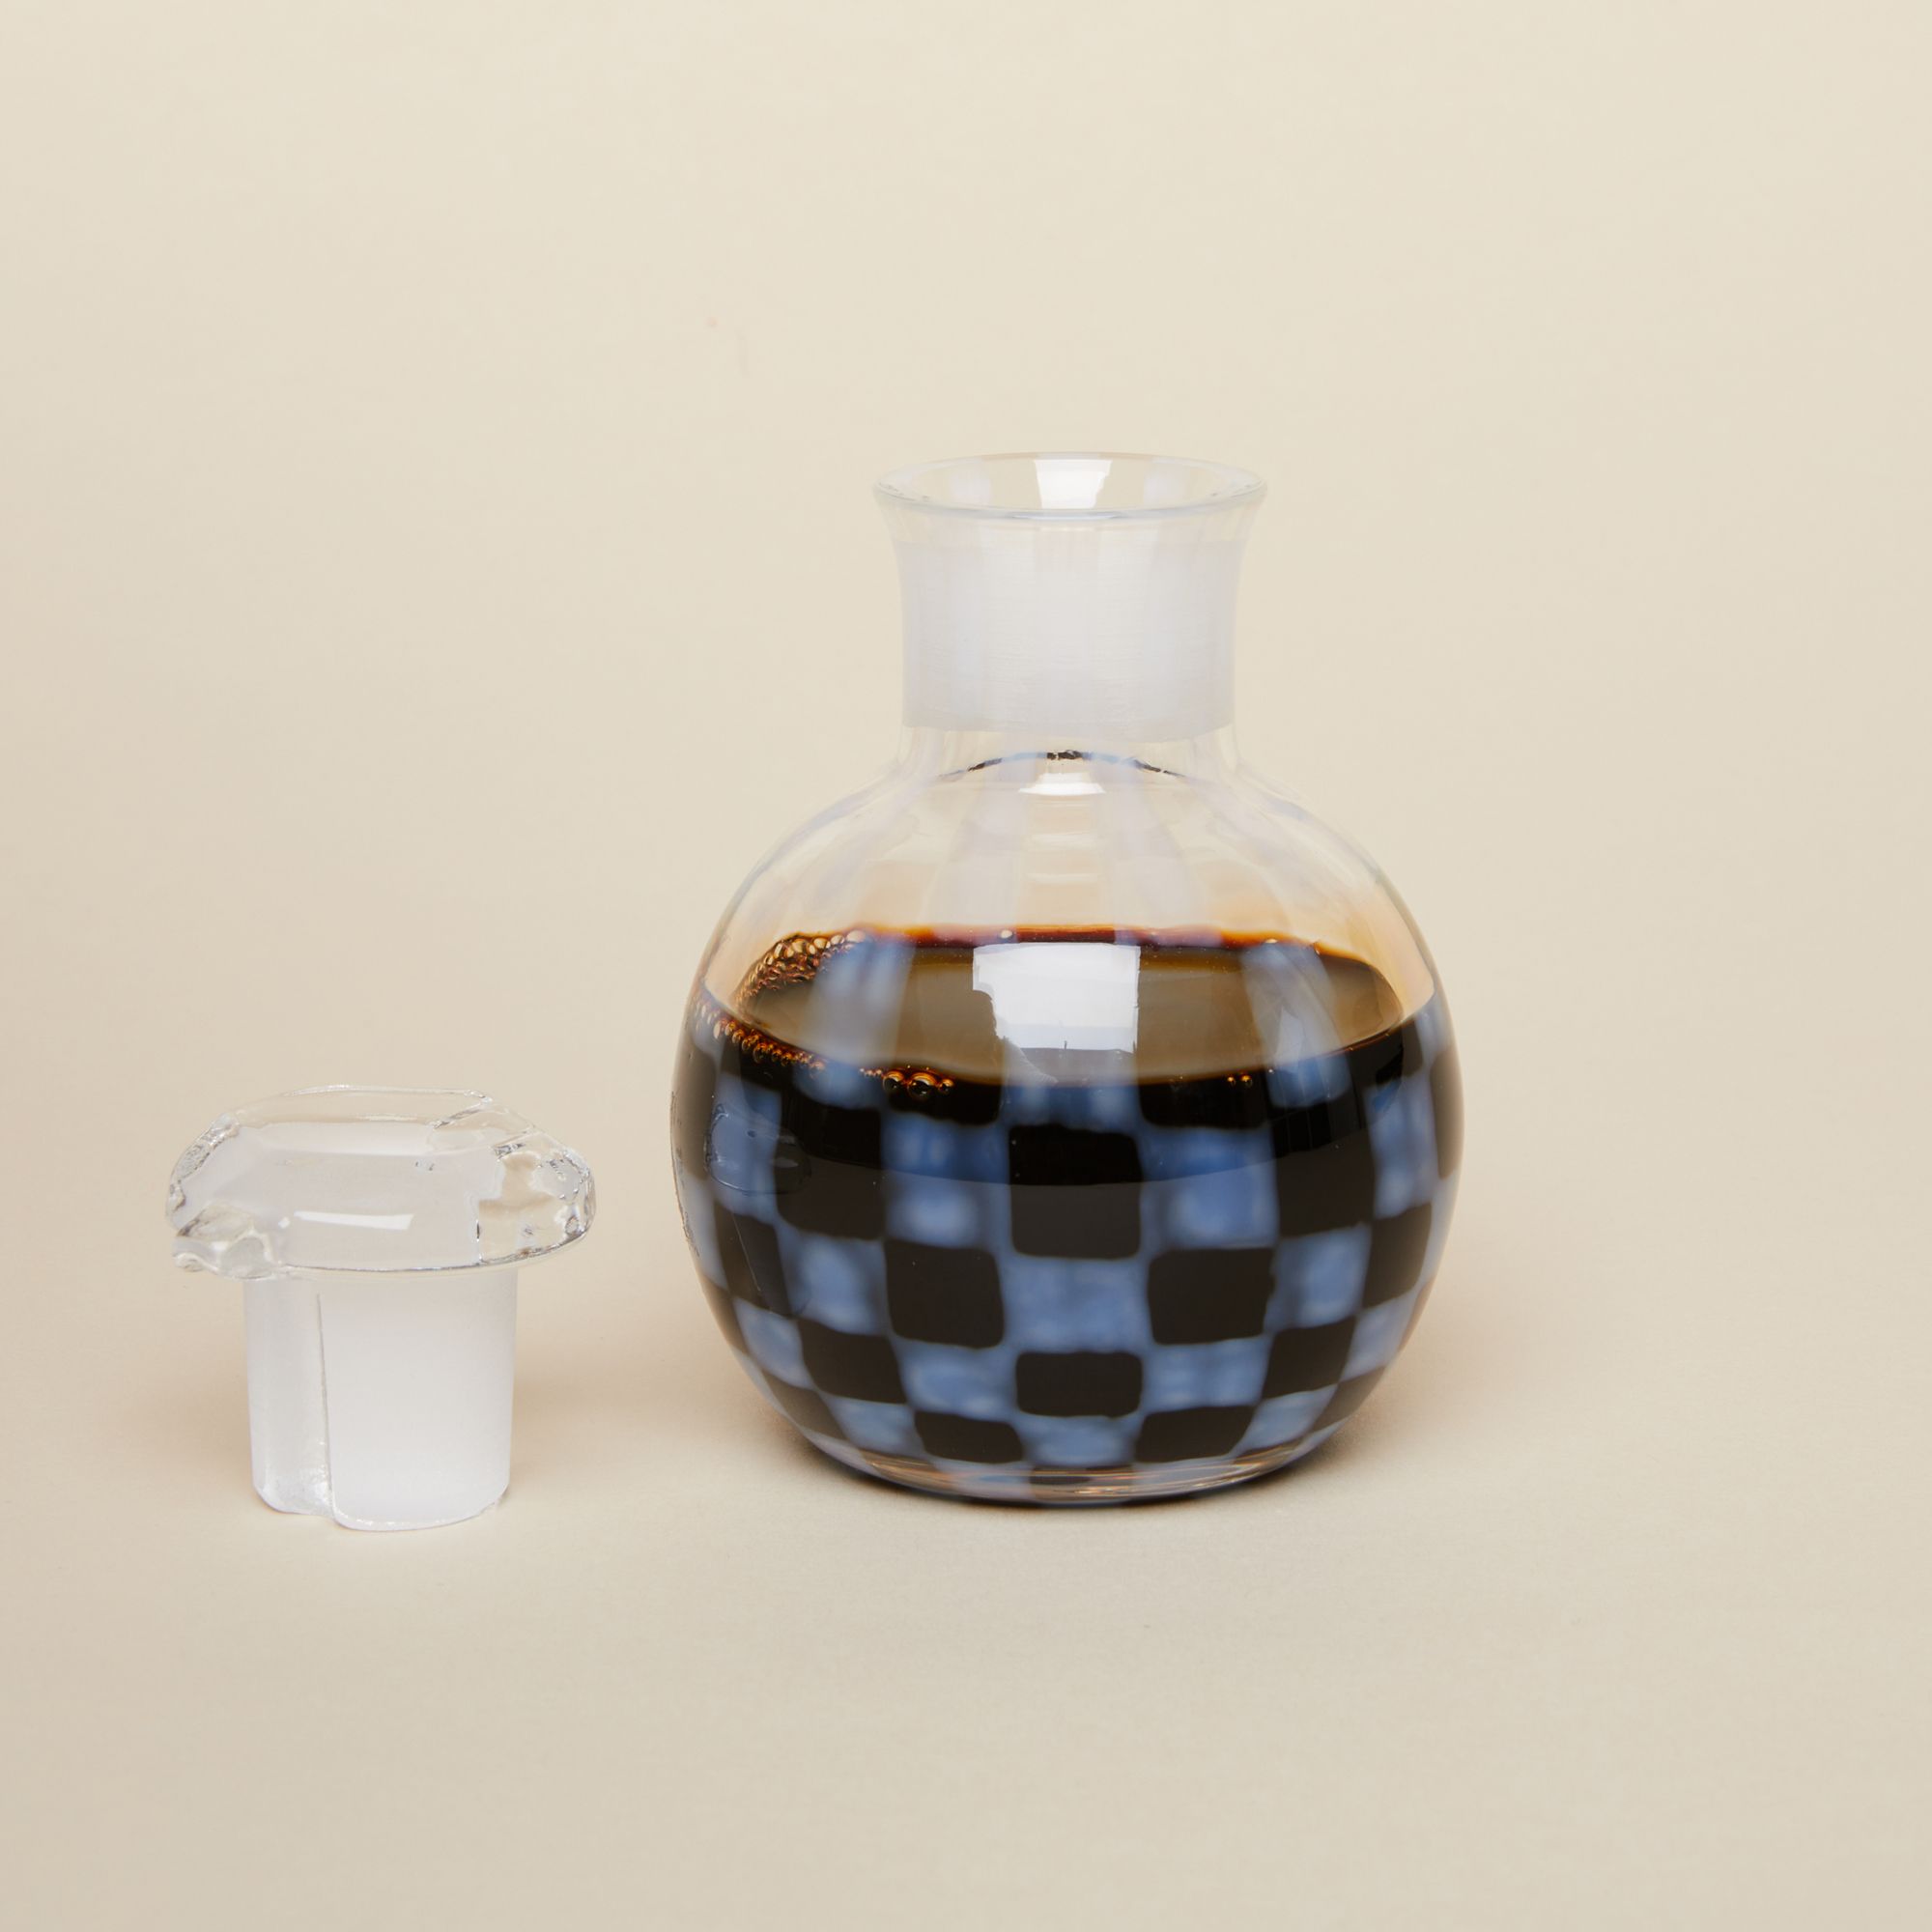 Round glass soy sauce holder with checkered pattern